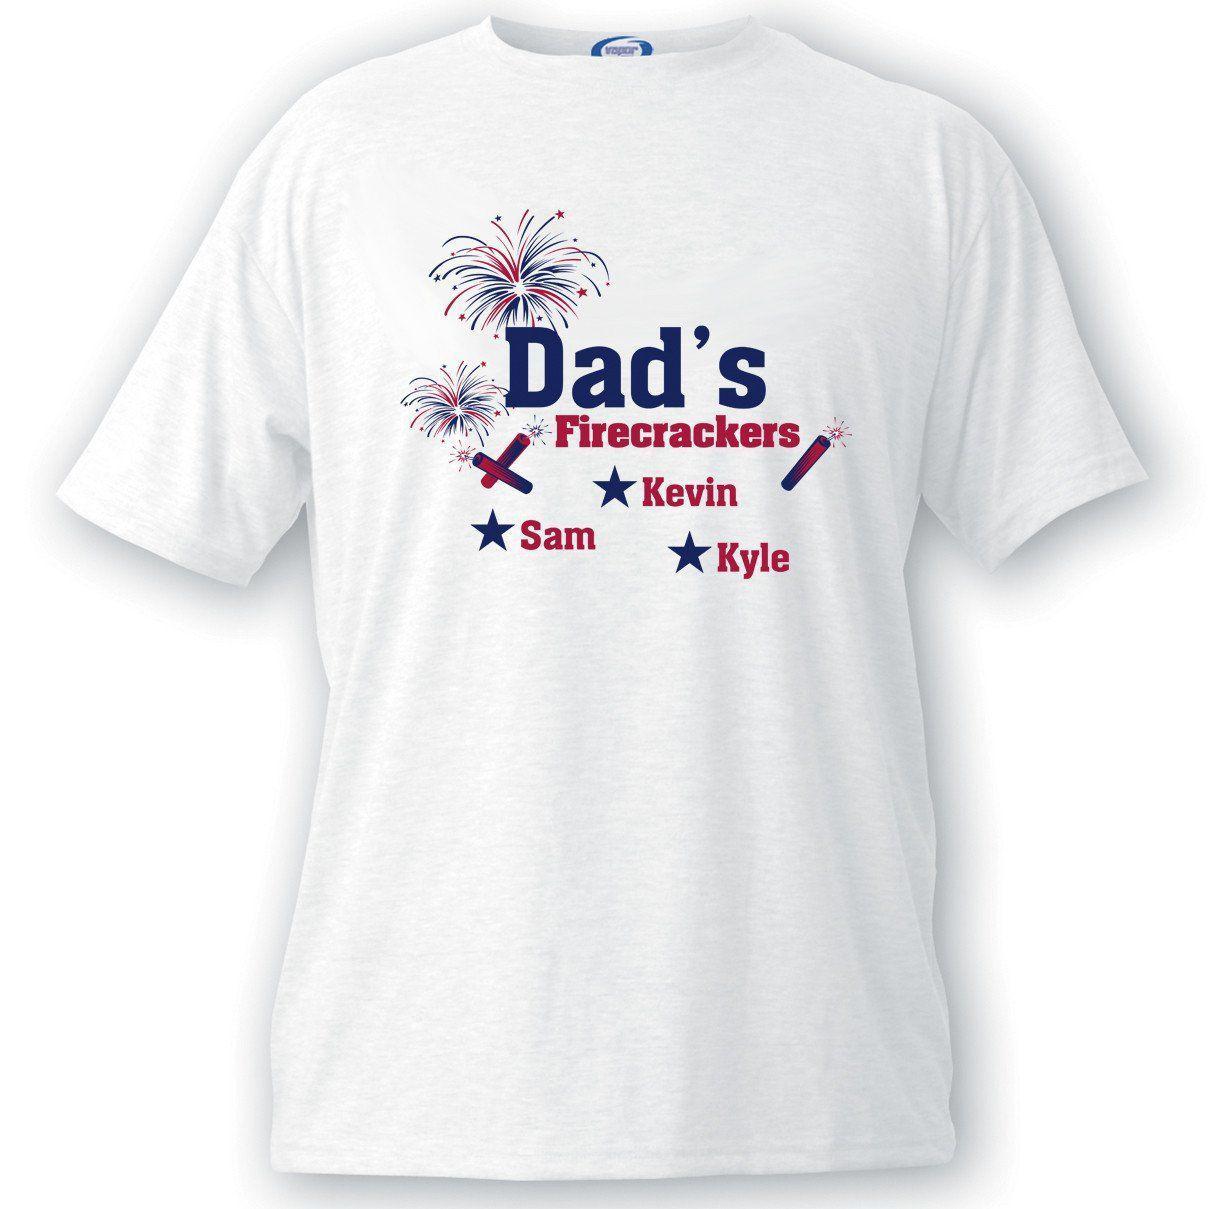 Personalized Dad's Firecrackers T-shirt